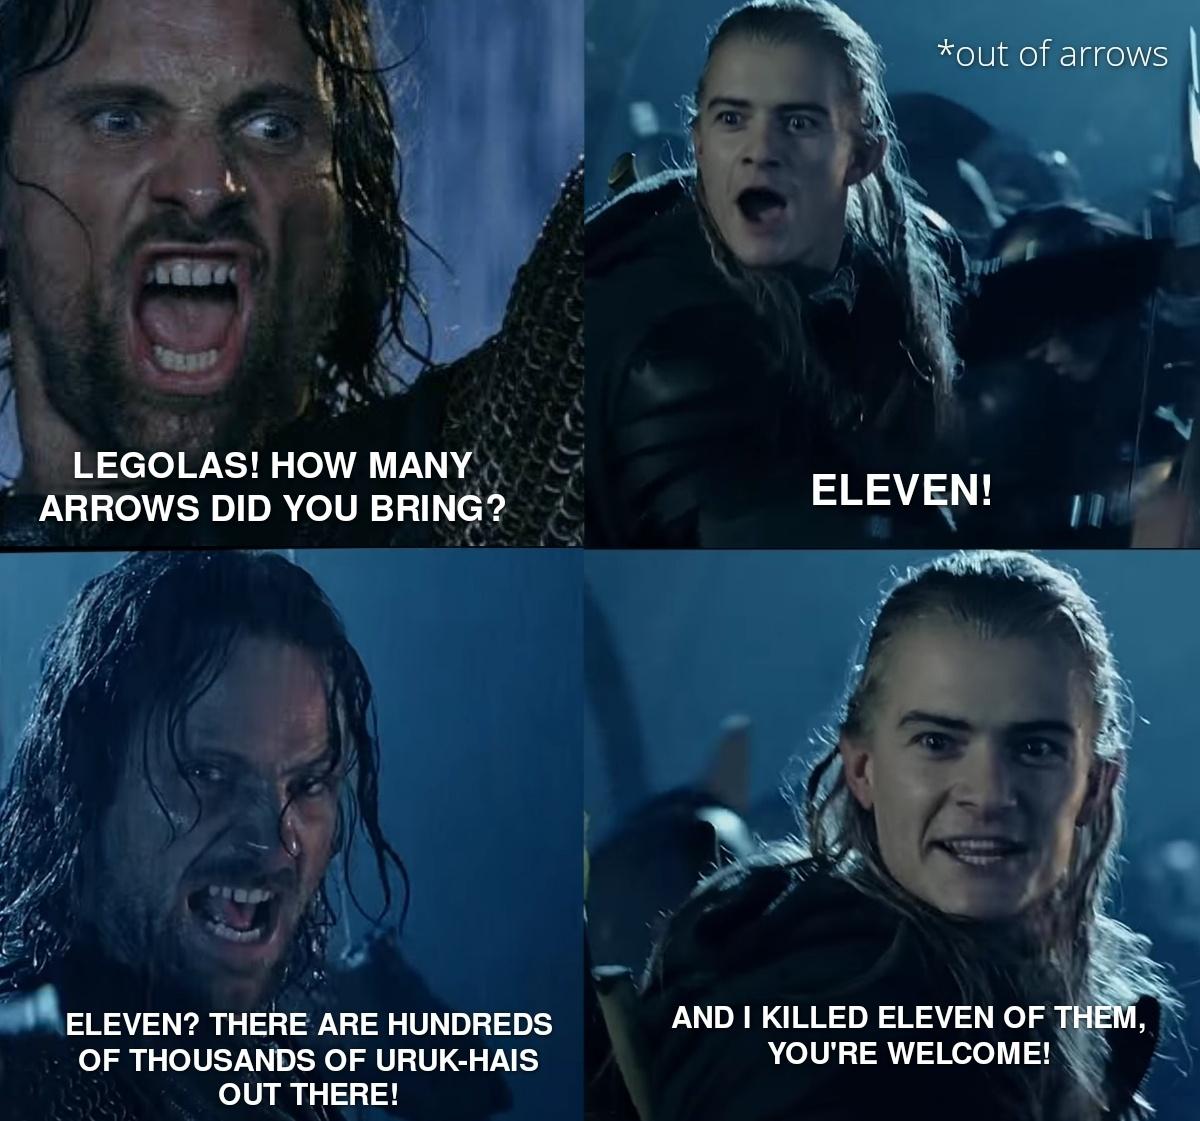 monday morning randomness - lord of the rings memes legolas - Legolas! How Many Arrows Did You Bring? Eleven? There Are Hundreds Of Thousands Of UrukHais Out There! out of arrows Eleven! And I Killed Eleven Of Them, You'Re Welcome!